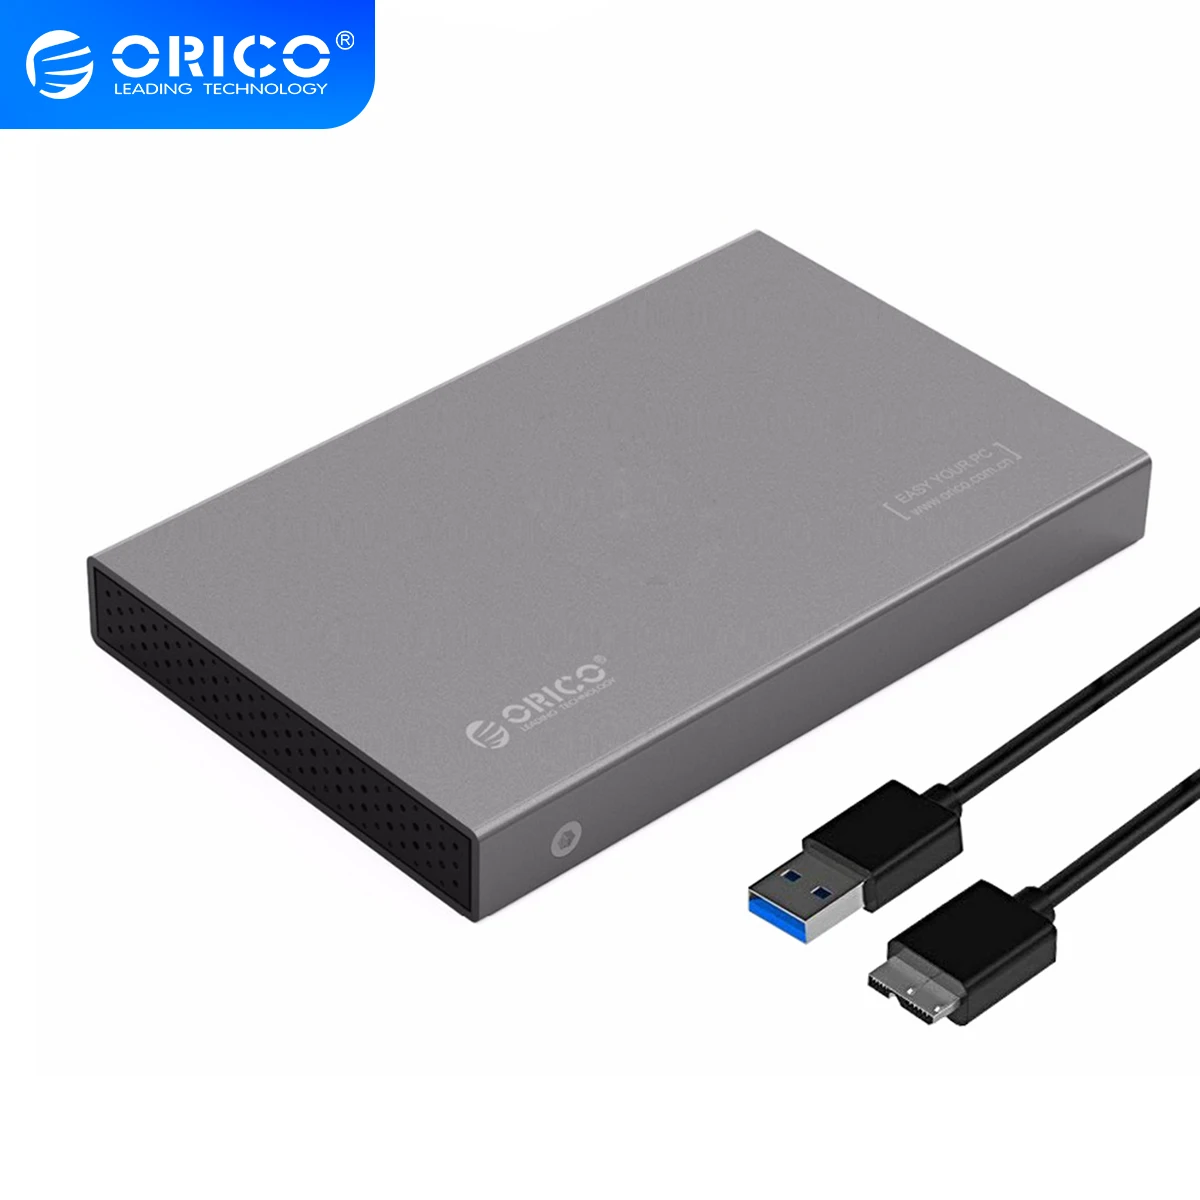 

ORICO Aluminum USB3.0 to SATA3.0 HDD Case 2TB 5Gbps 2.5 inch Hard Drive Enclosure Support 7mm & 9.5mm UASP Transfer Protocol